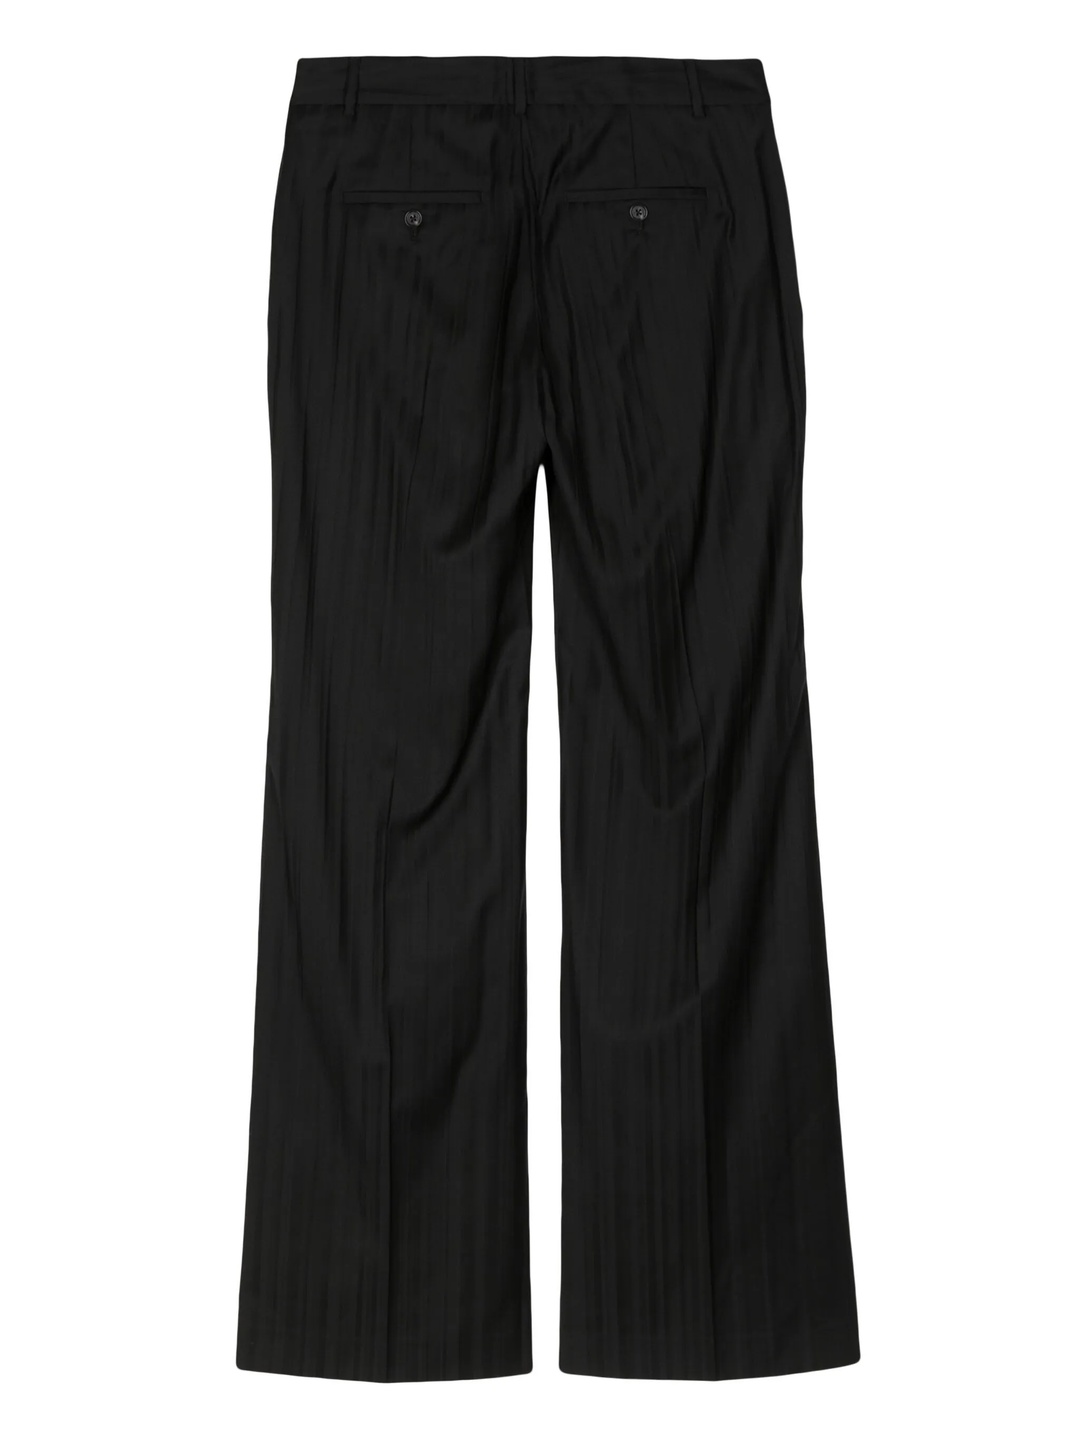 Womens Trousers - 2